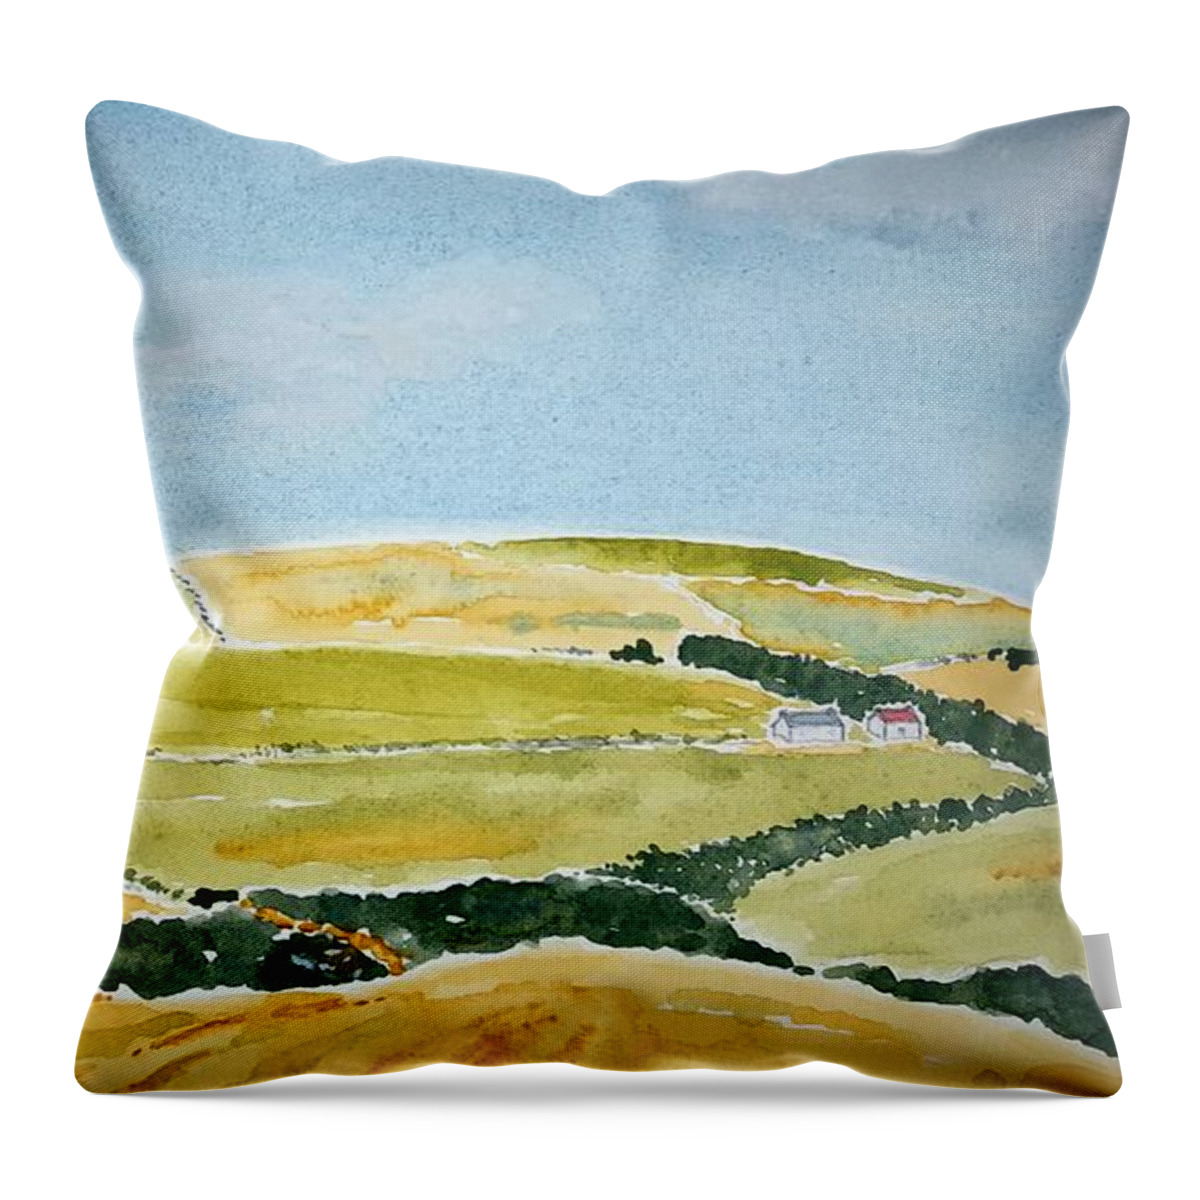 Watercolor Throw Pillow featuring the painting Ayrshire Farms by John Klobucher